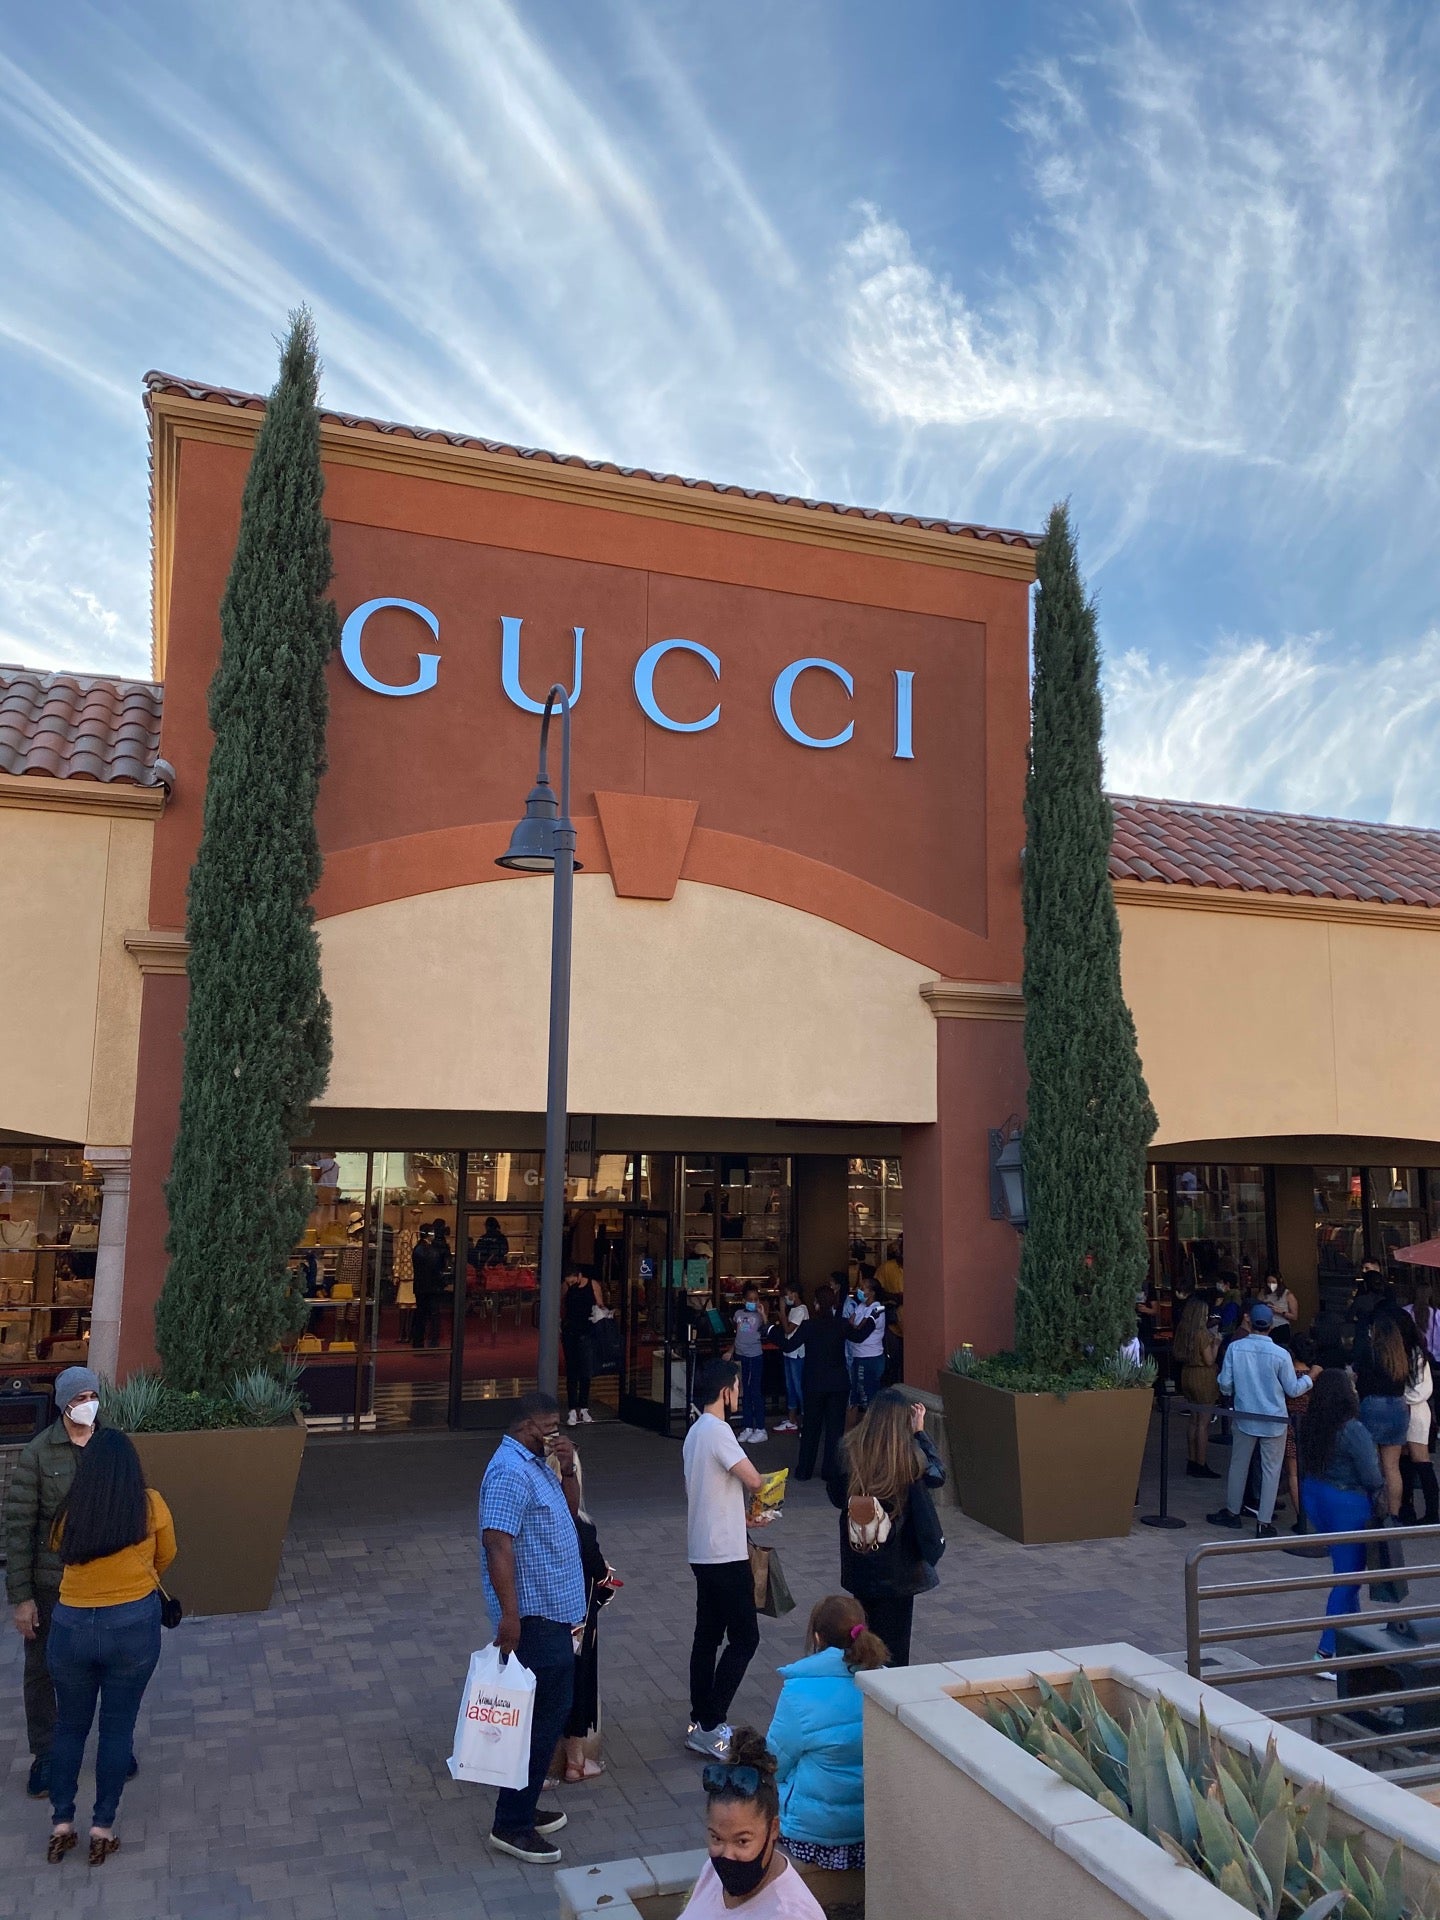 Gucci - Cabazon Outlet Timepieces and Jewelry, 48650 Seminole Dr, Cabazon,  CA, Men's Apparel - MapQuest